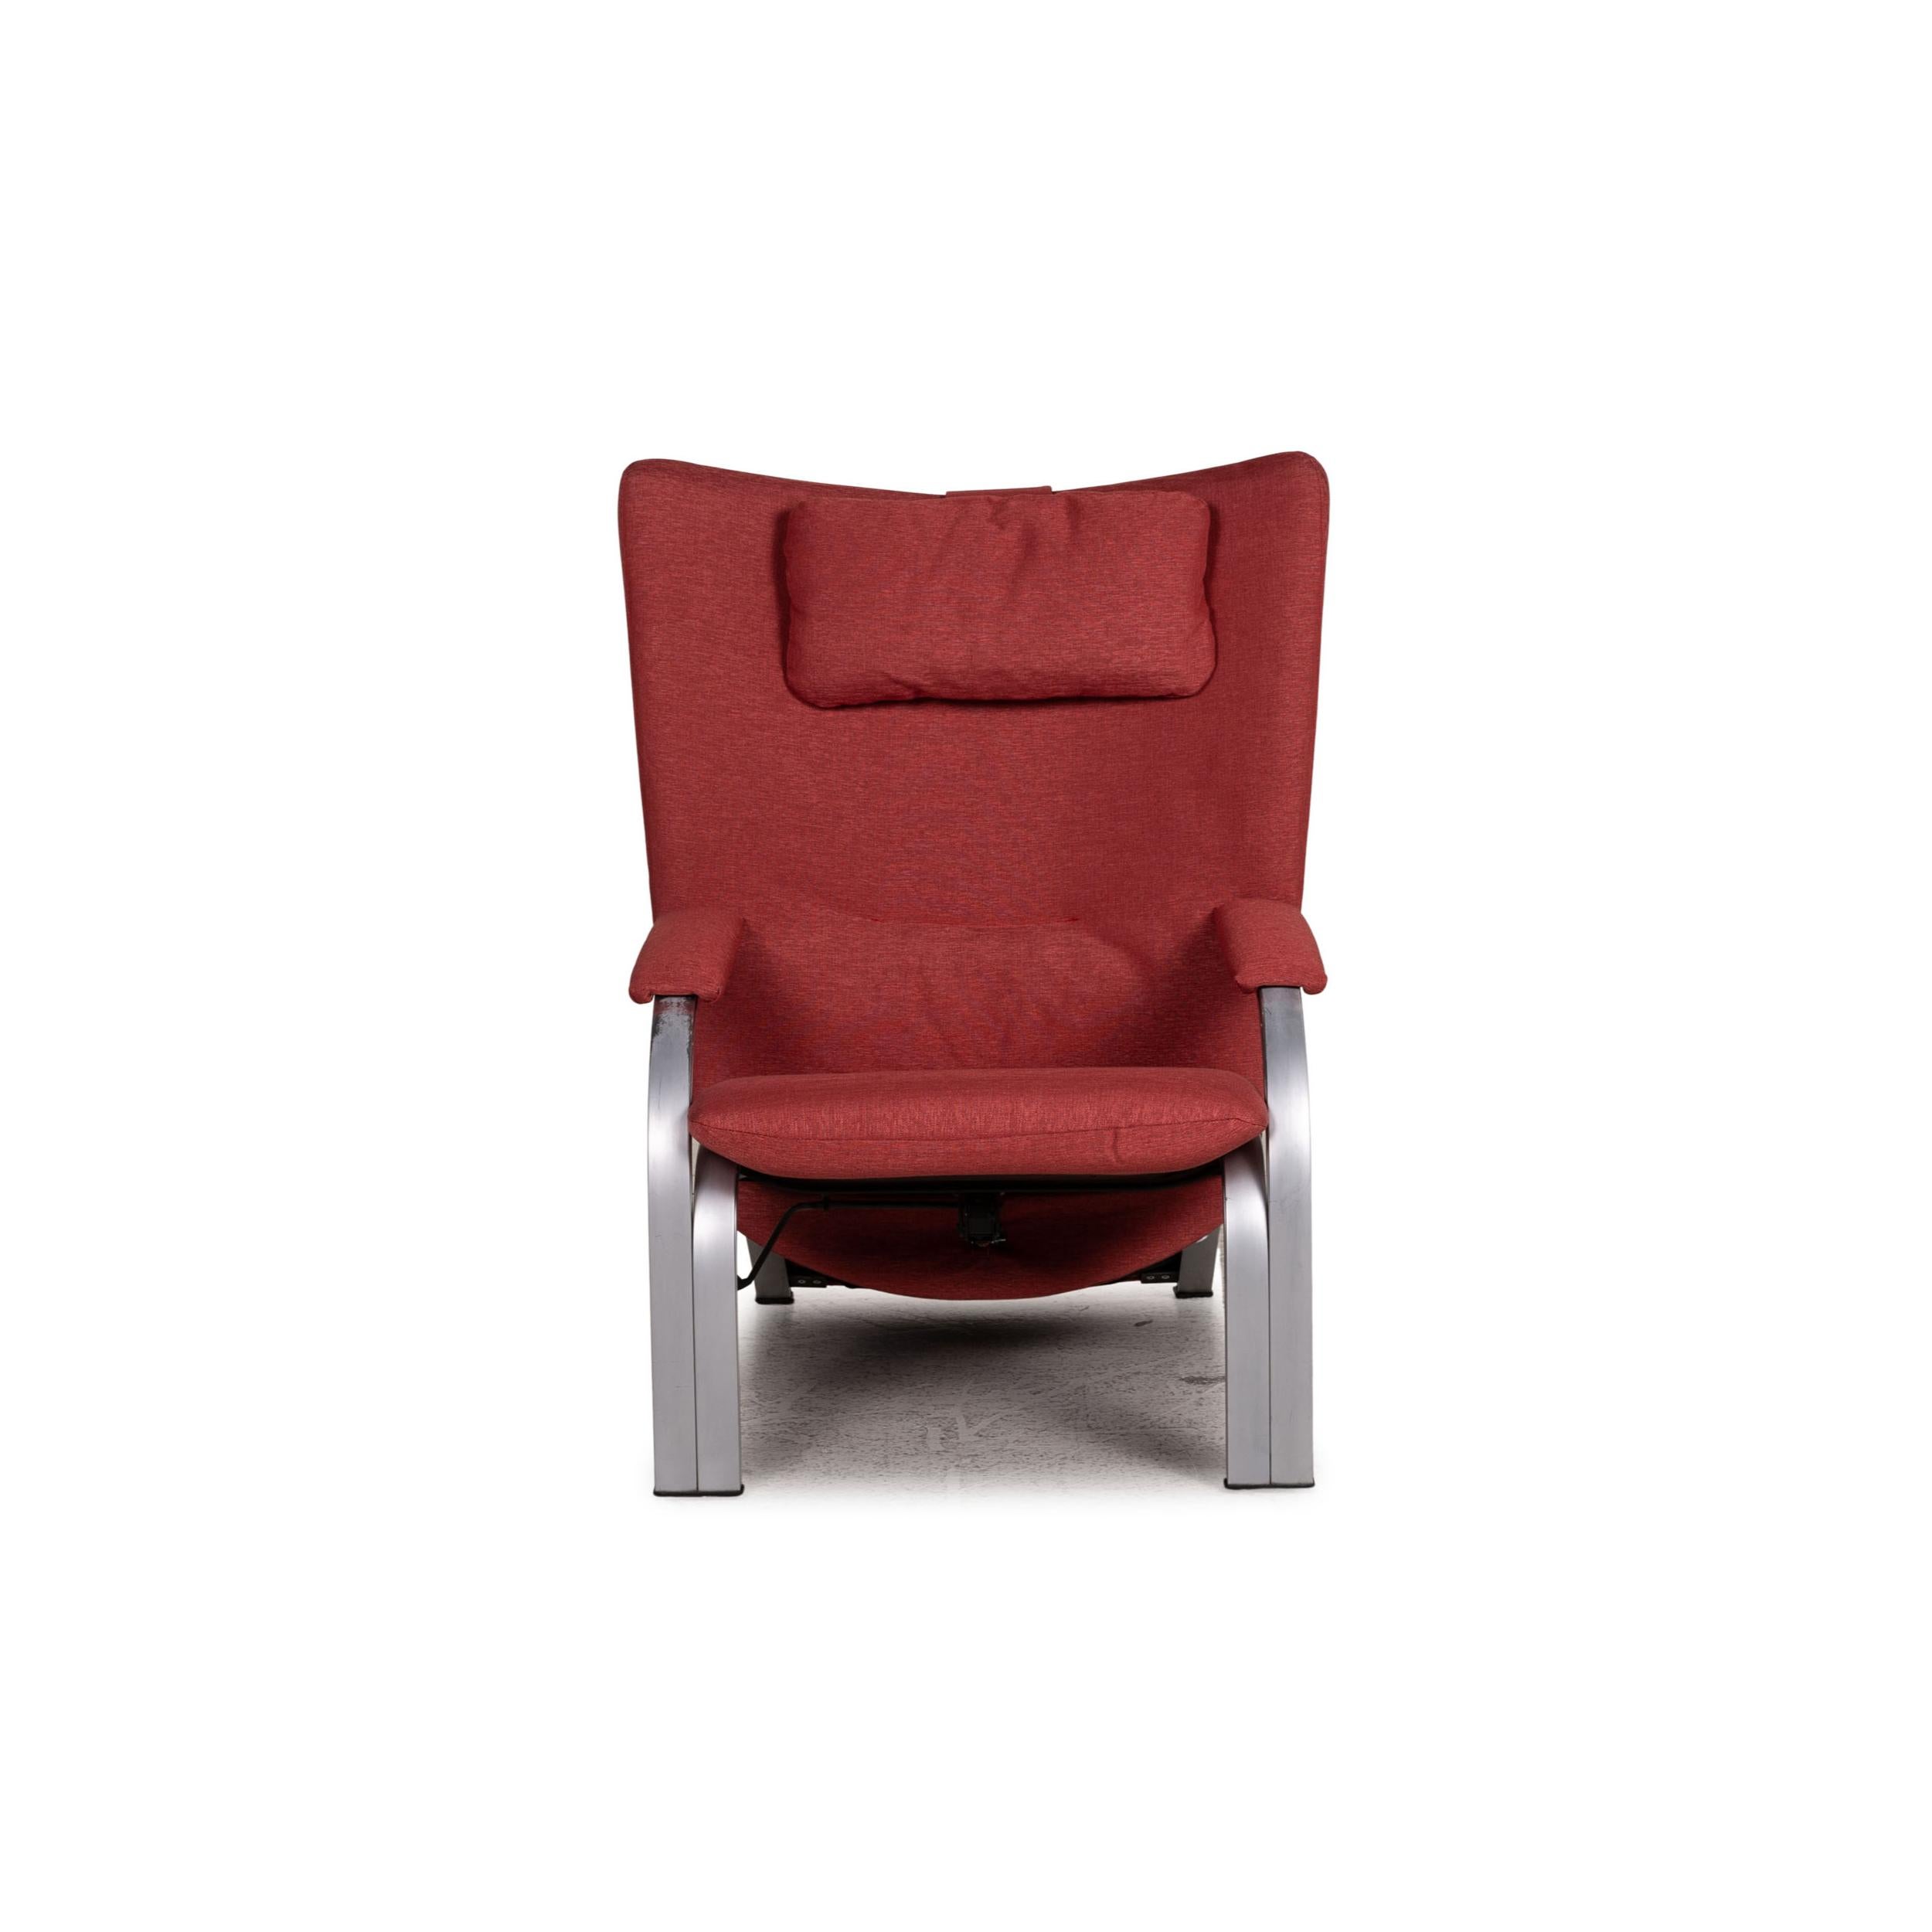 European WK Wohnen Spot 698 Armchair Fabric Red Function Relaxation Function For Sale